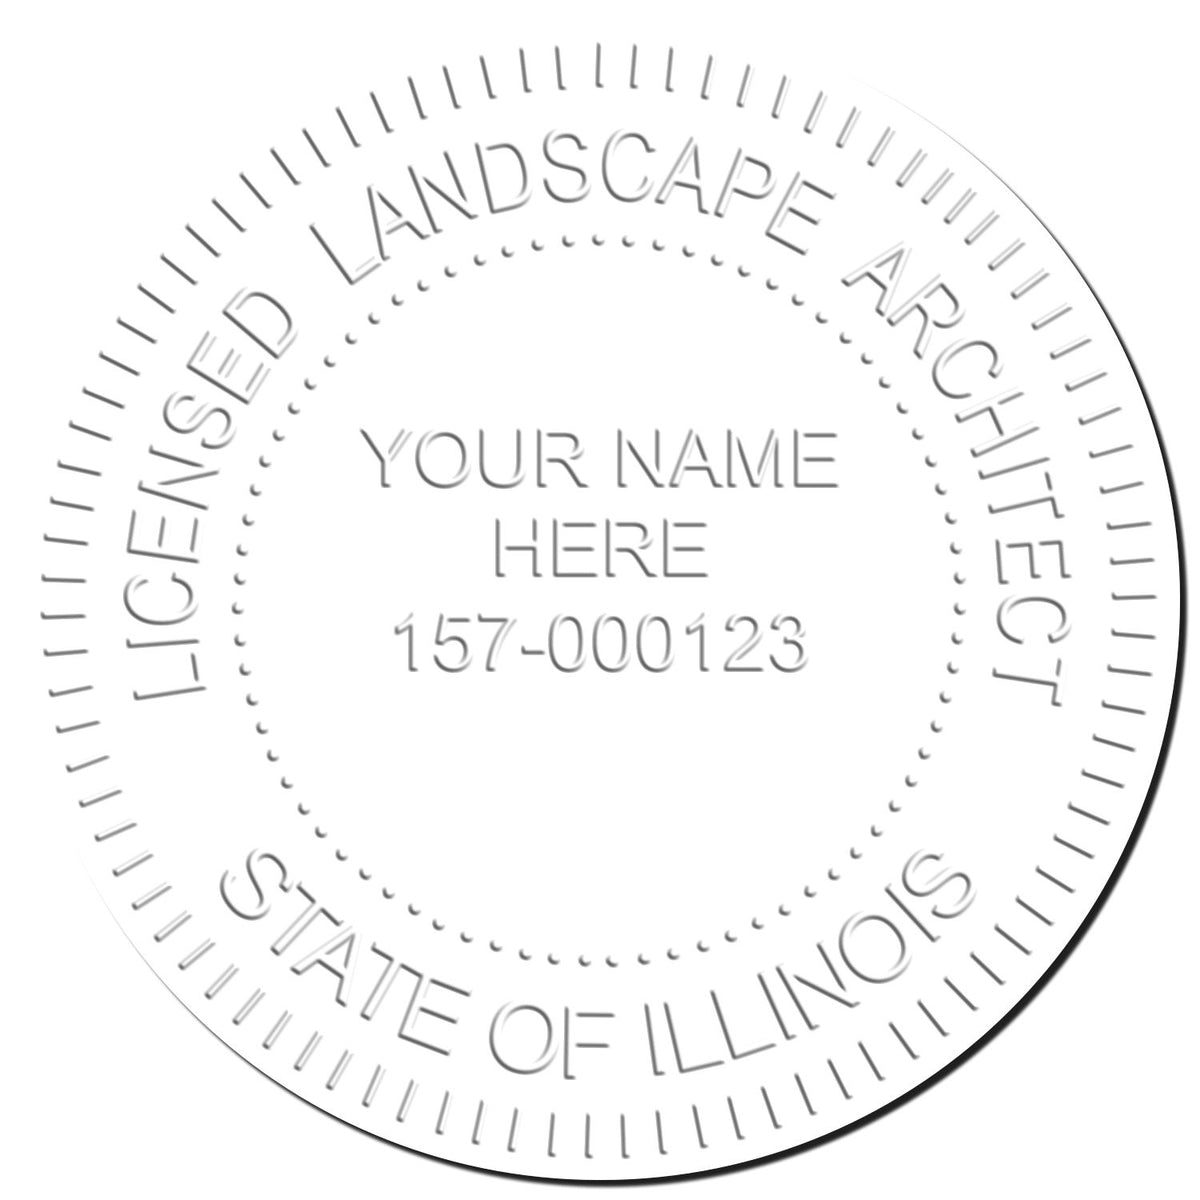 This paper is stamped with a sample imprint of the Gift Illinois Landscape Architect Seal, signifying its quality and reliability.